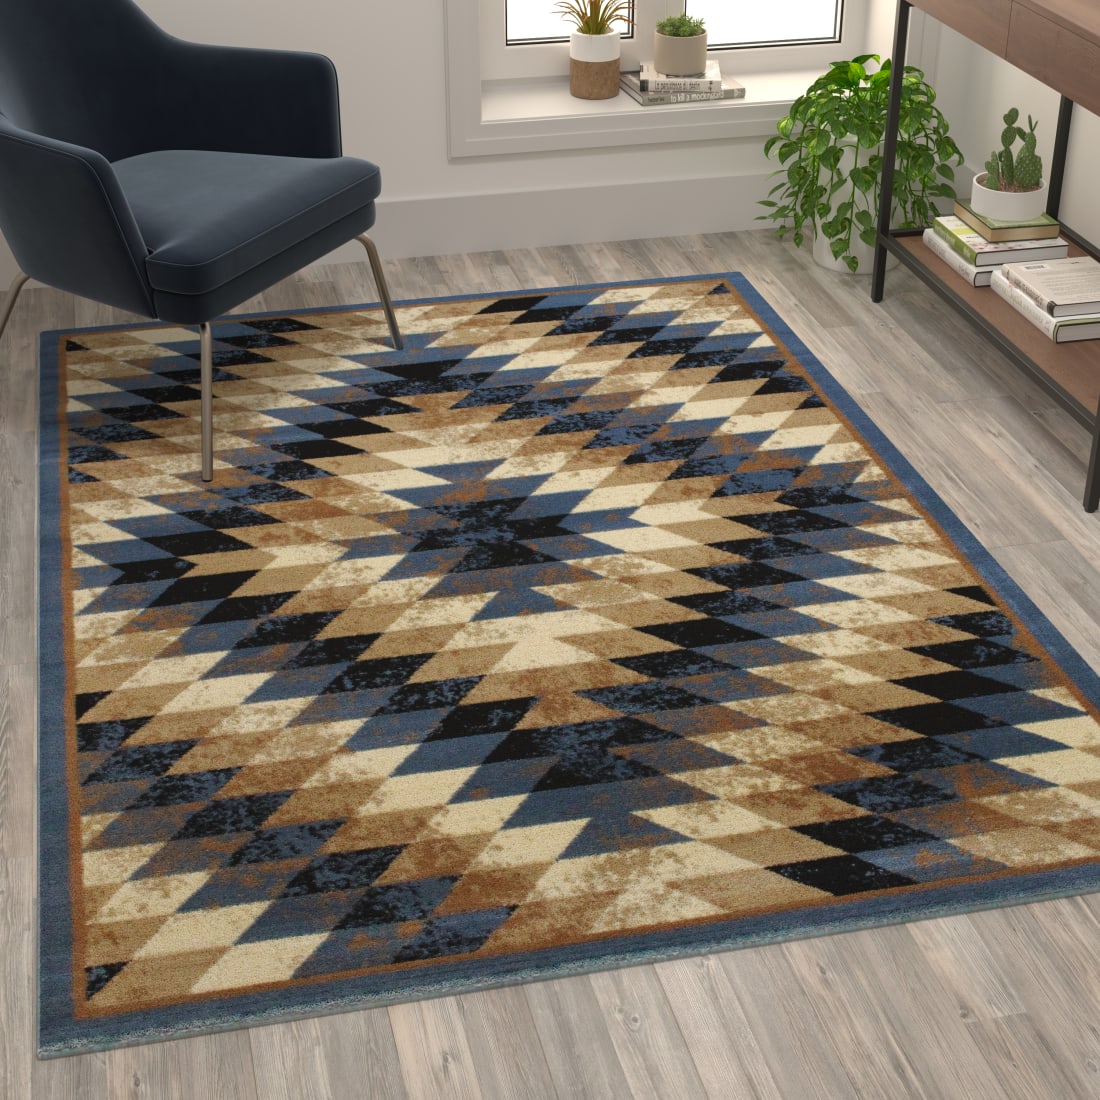 Teagan Collection Southwestern 5' x 7' Blue Area Rug - Olefin Rug with Jute Backing